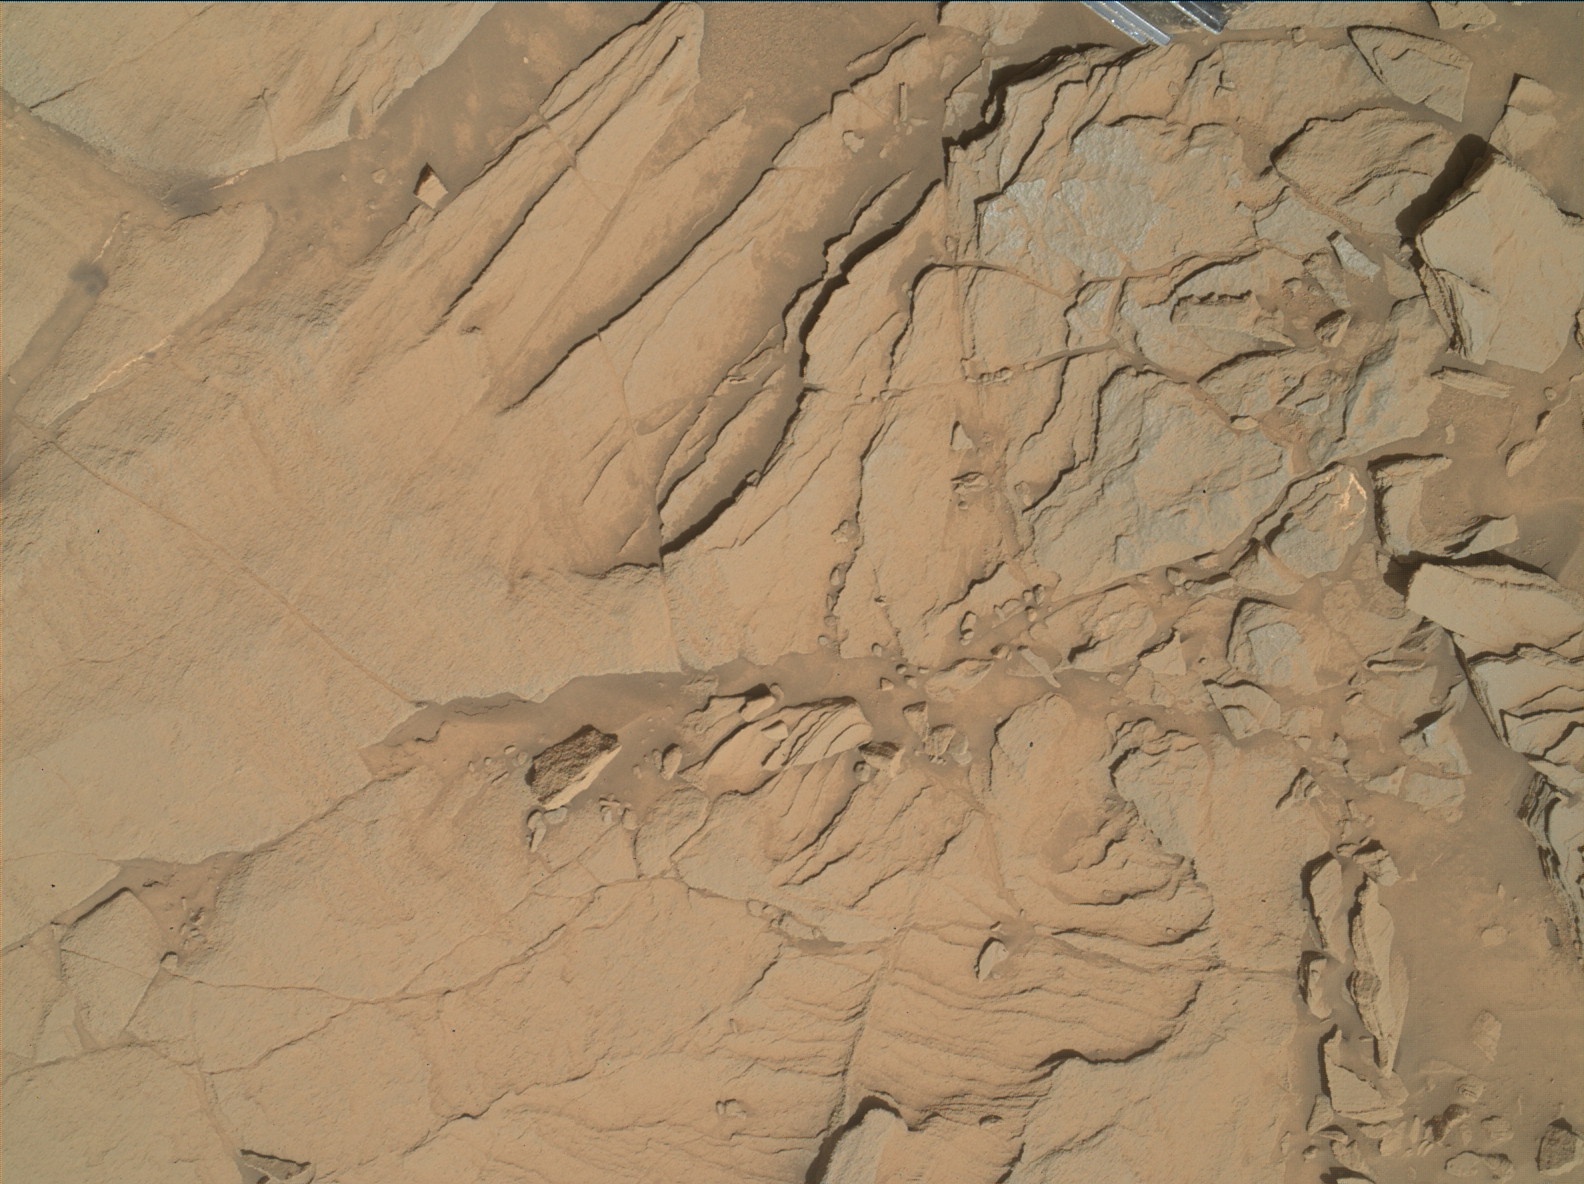 Nasa's Mars rover Curiosity acquired this image using its Mars Hand Lens Imager (MAHLI) on Sol 1338